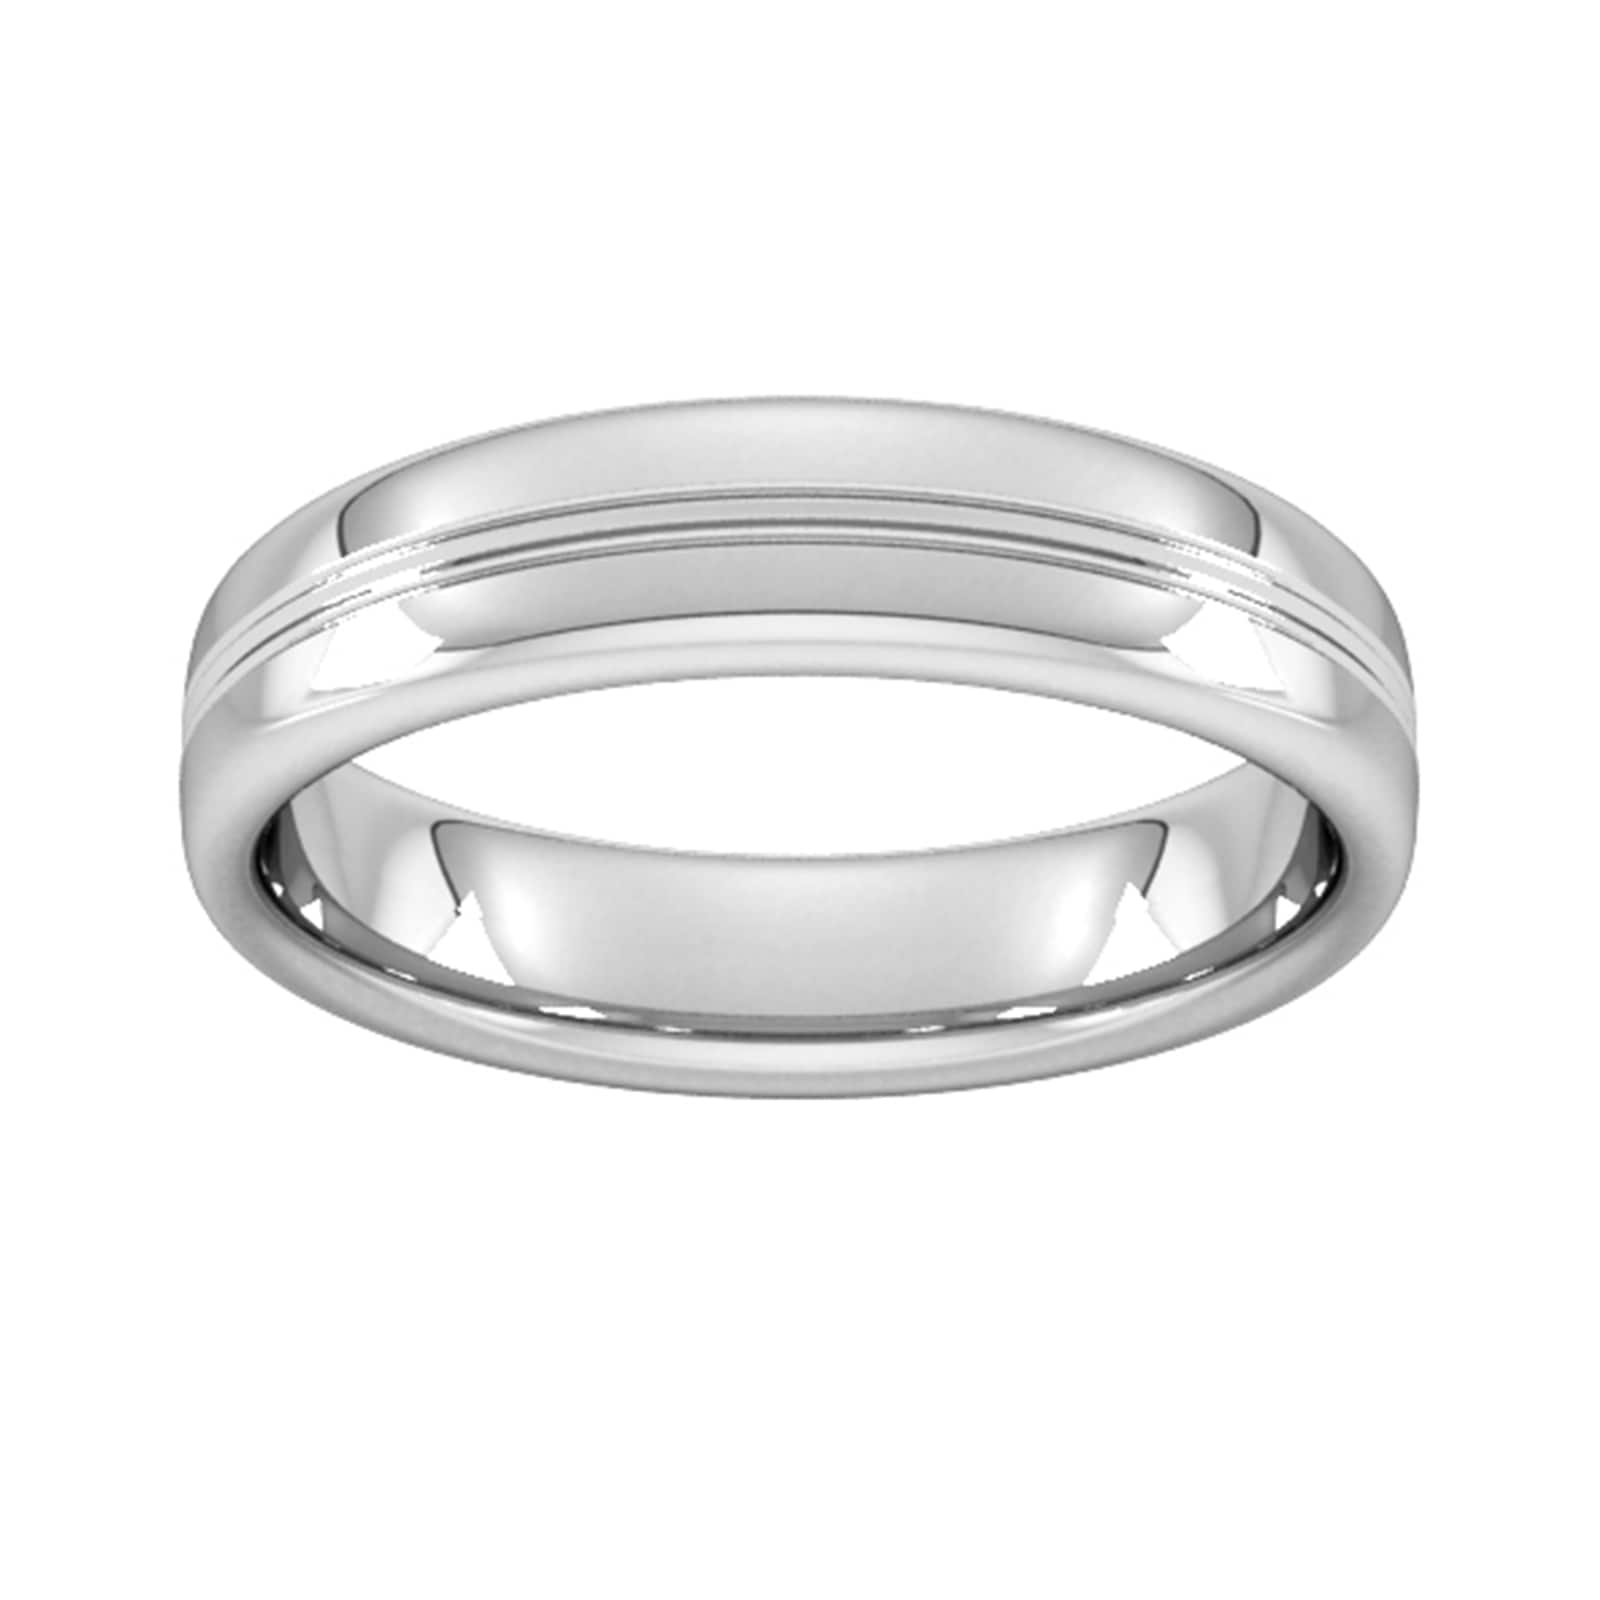 5mm Slight Court Heavy Grooved Polished Finish Wedding Ring In 950 Palladium - Ring Size T